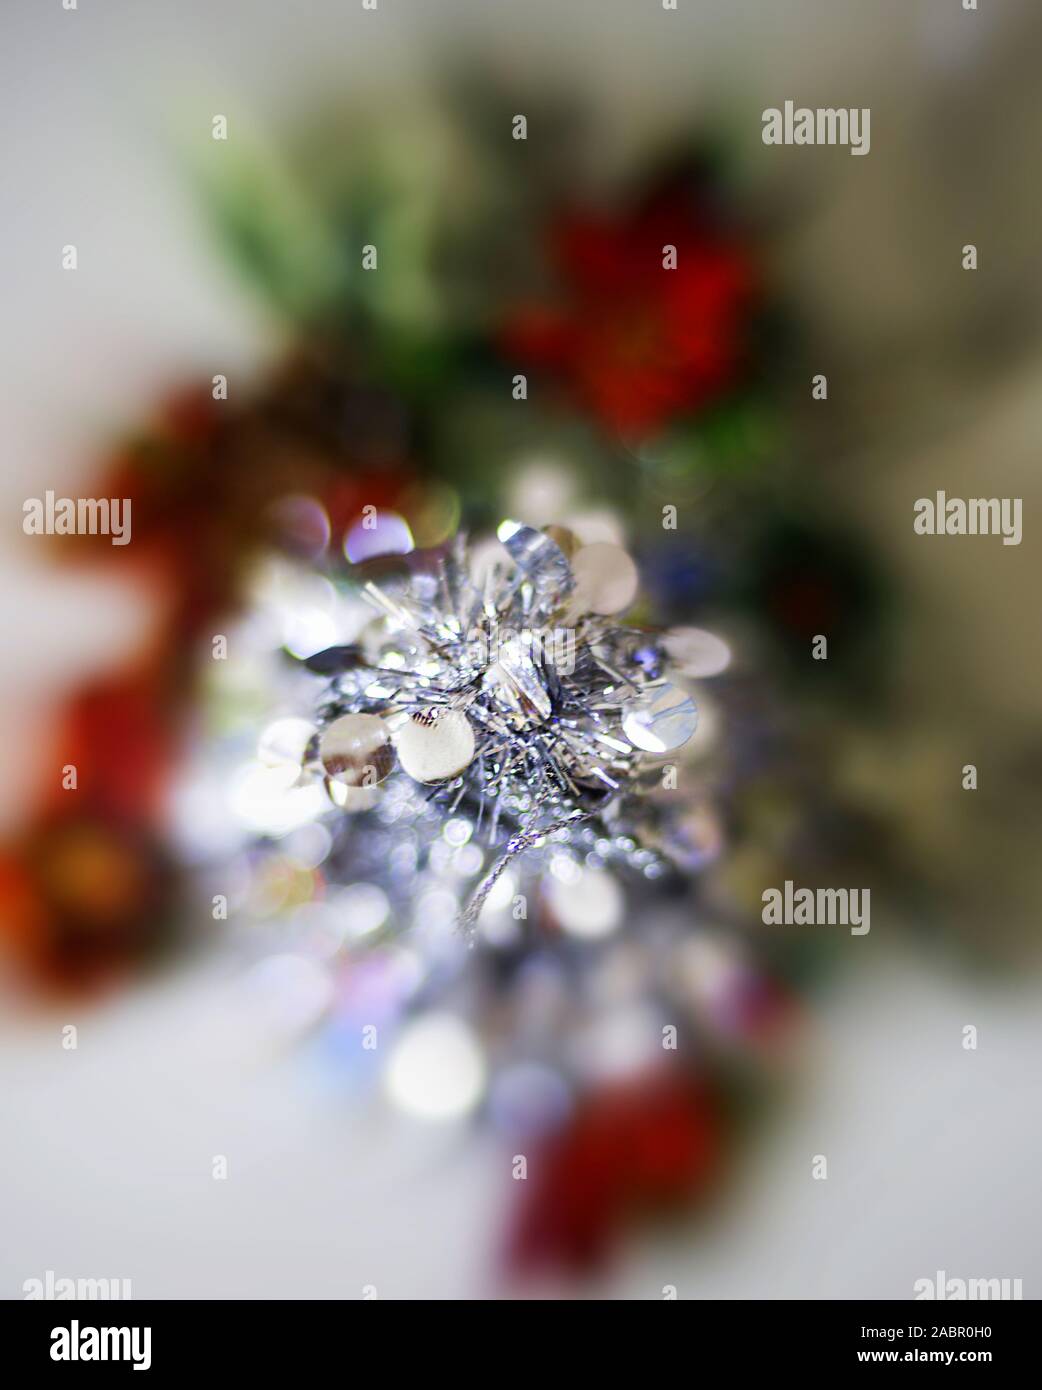 Macro vertical photograph taken from above of the top of a homemade Christmas tree with shallow depth of field. Stock Photo